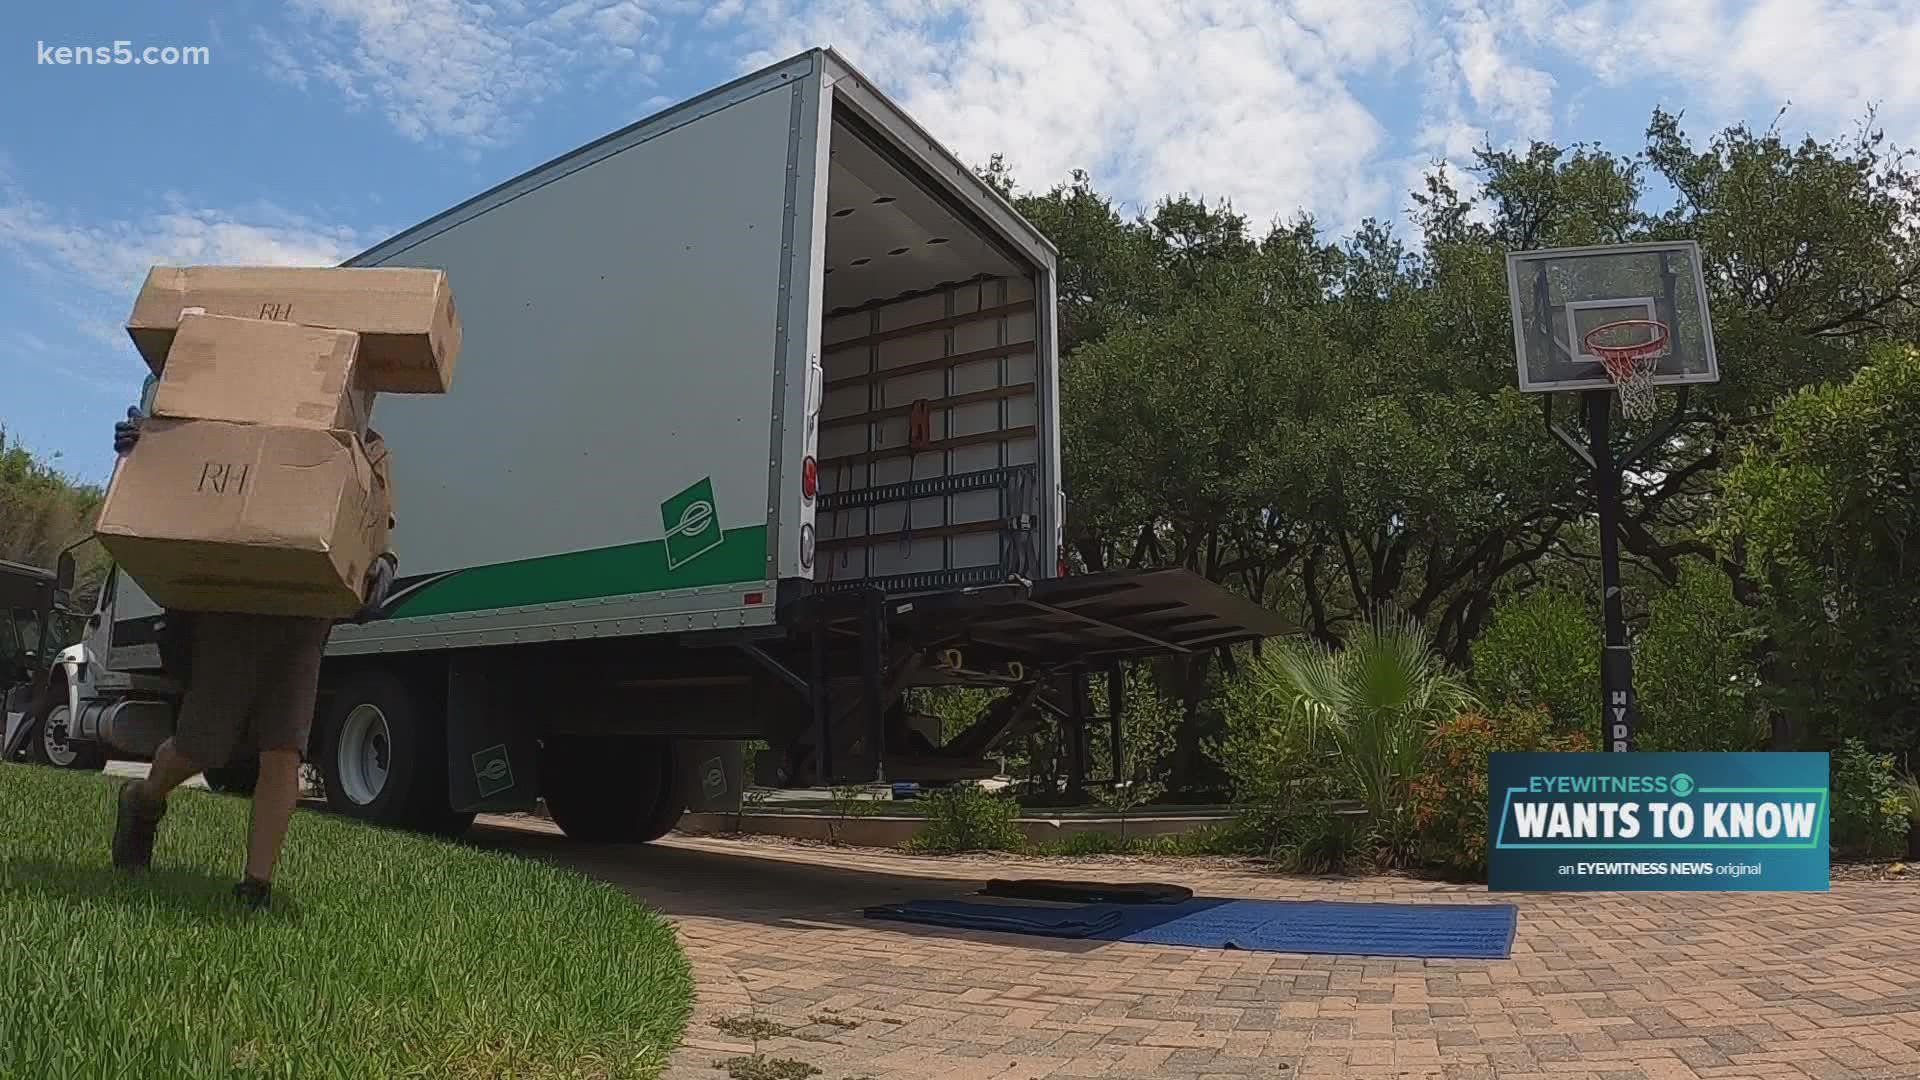 How can you be sure the moving company you're hiring is legit? KENS 5's Niccole Caan explains.